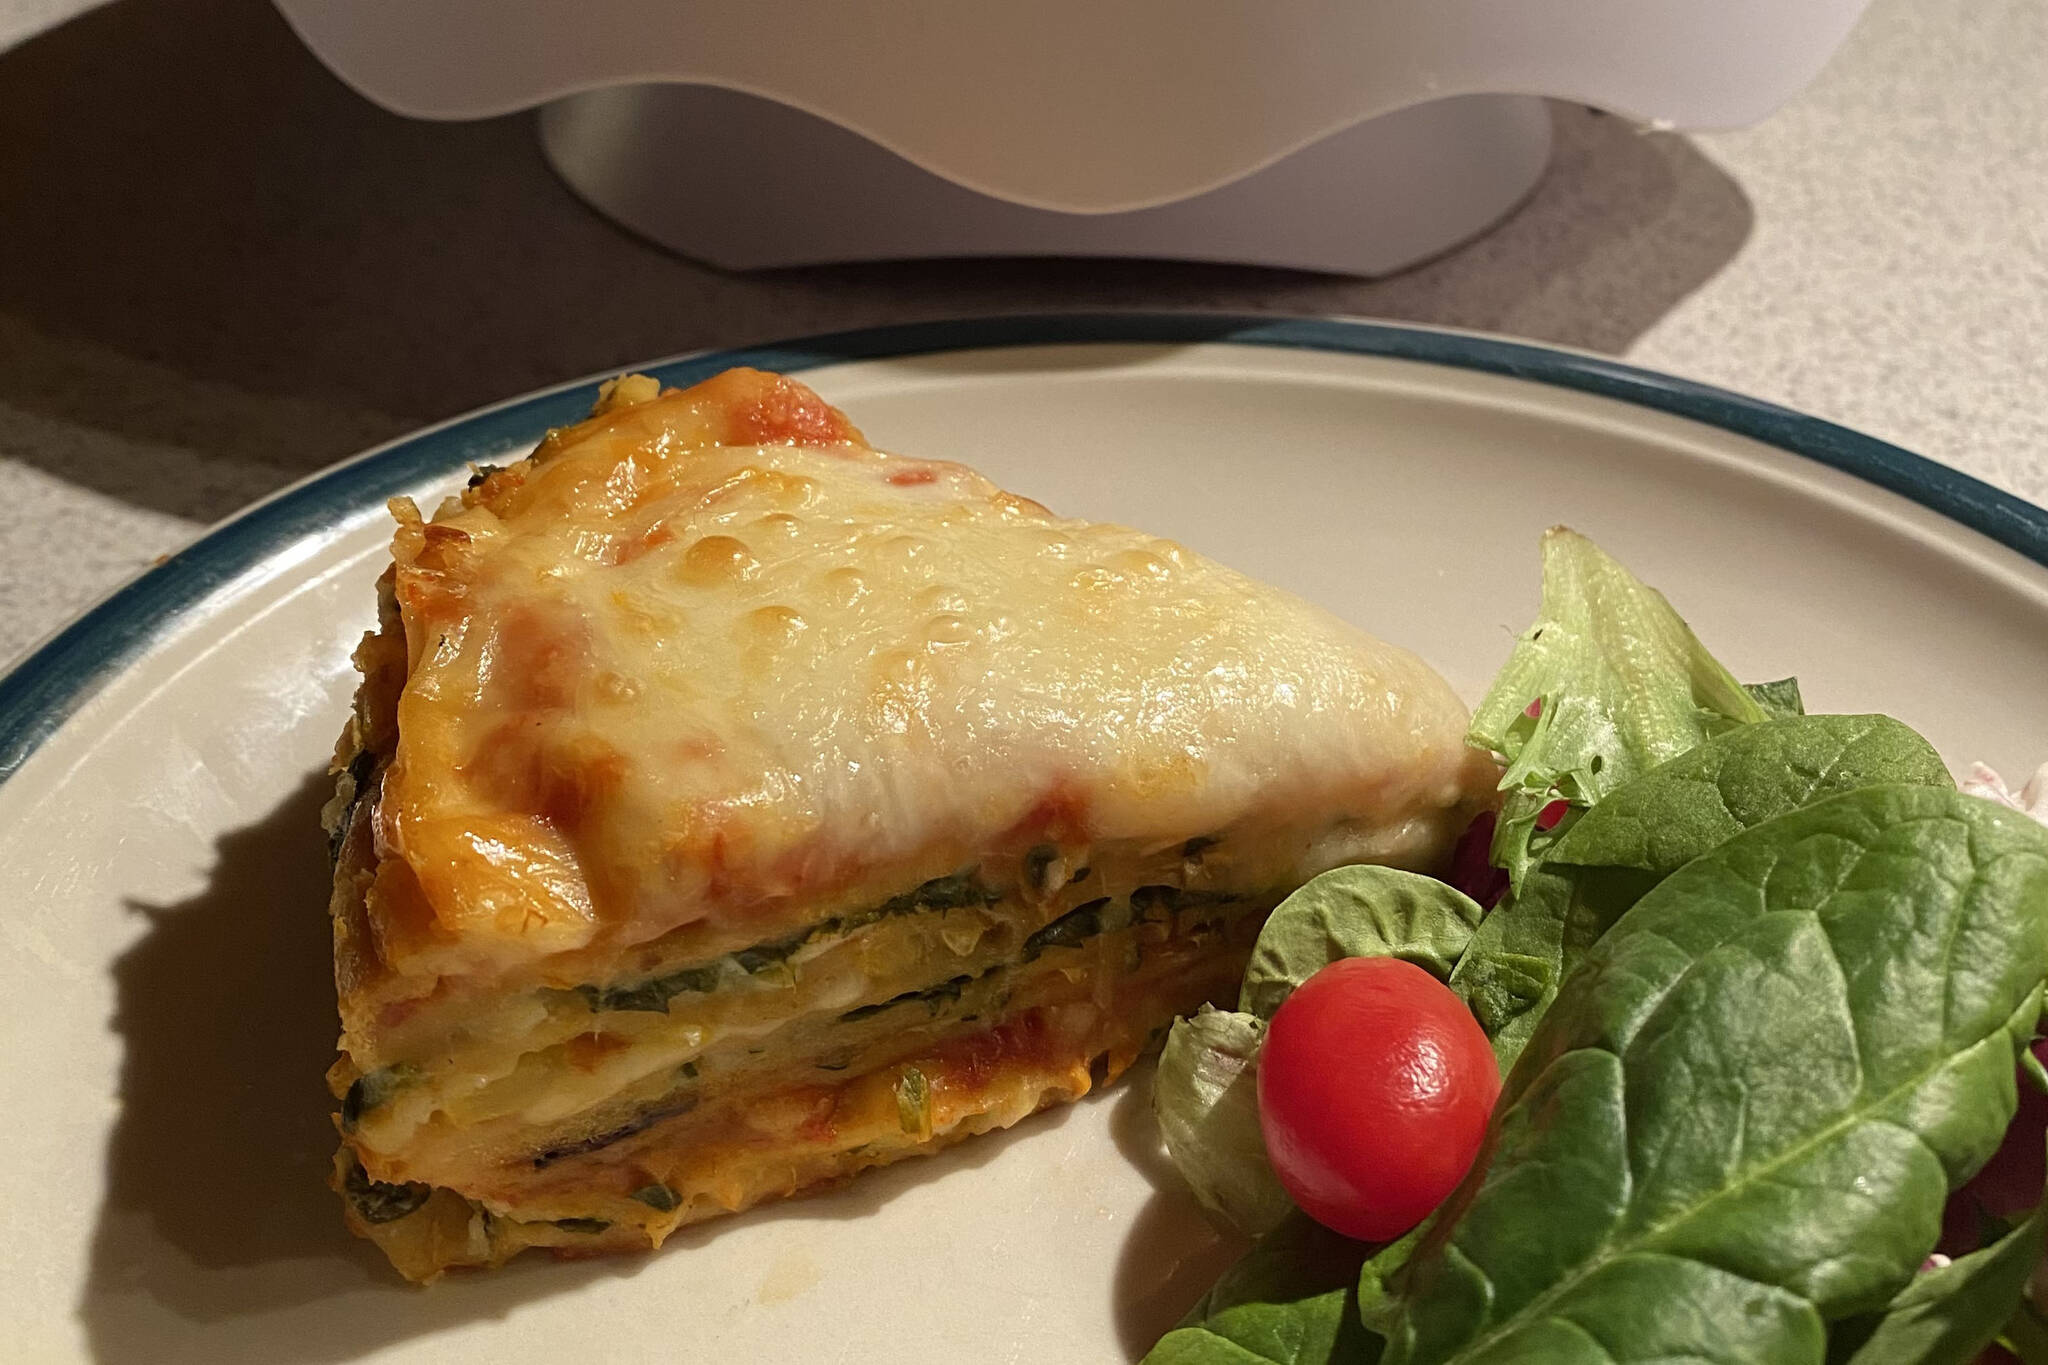 The secret to this homemade vegetarian lasagna is the addition of fresh noodles from scratch. (Photo by Tressa Dale/Peninsula Clarion)